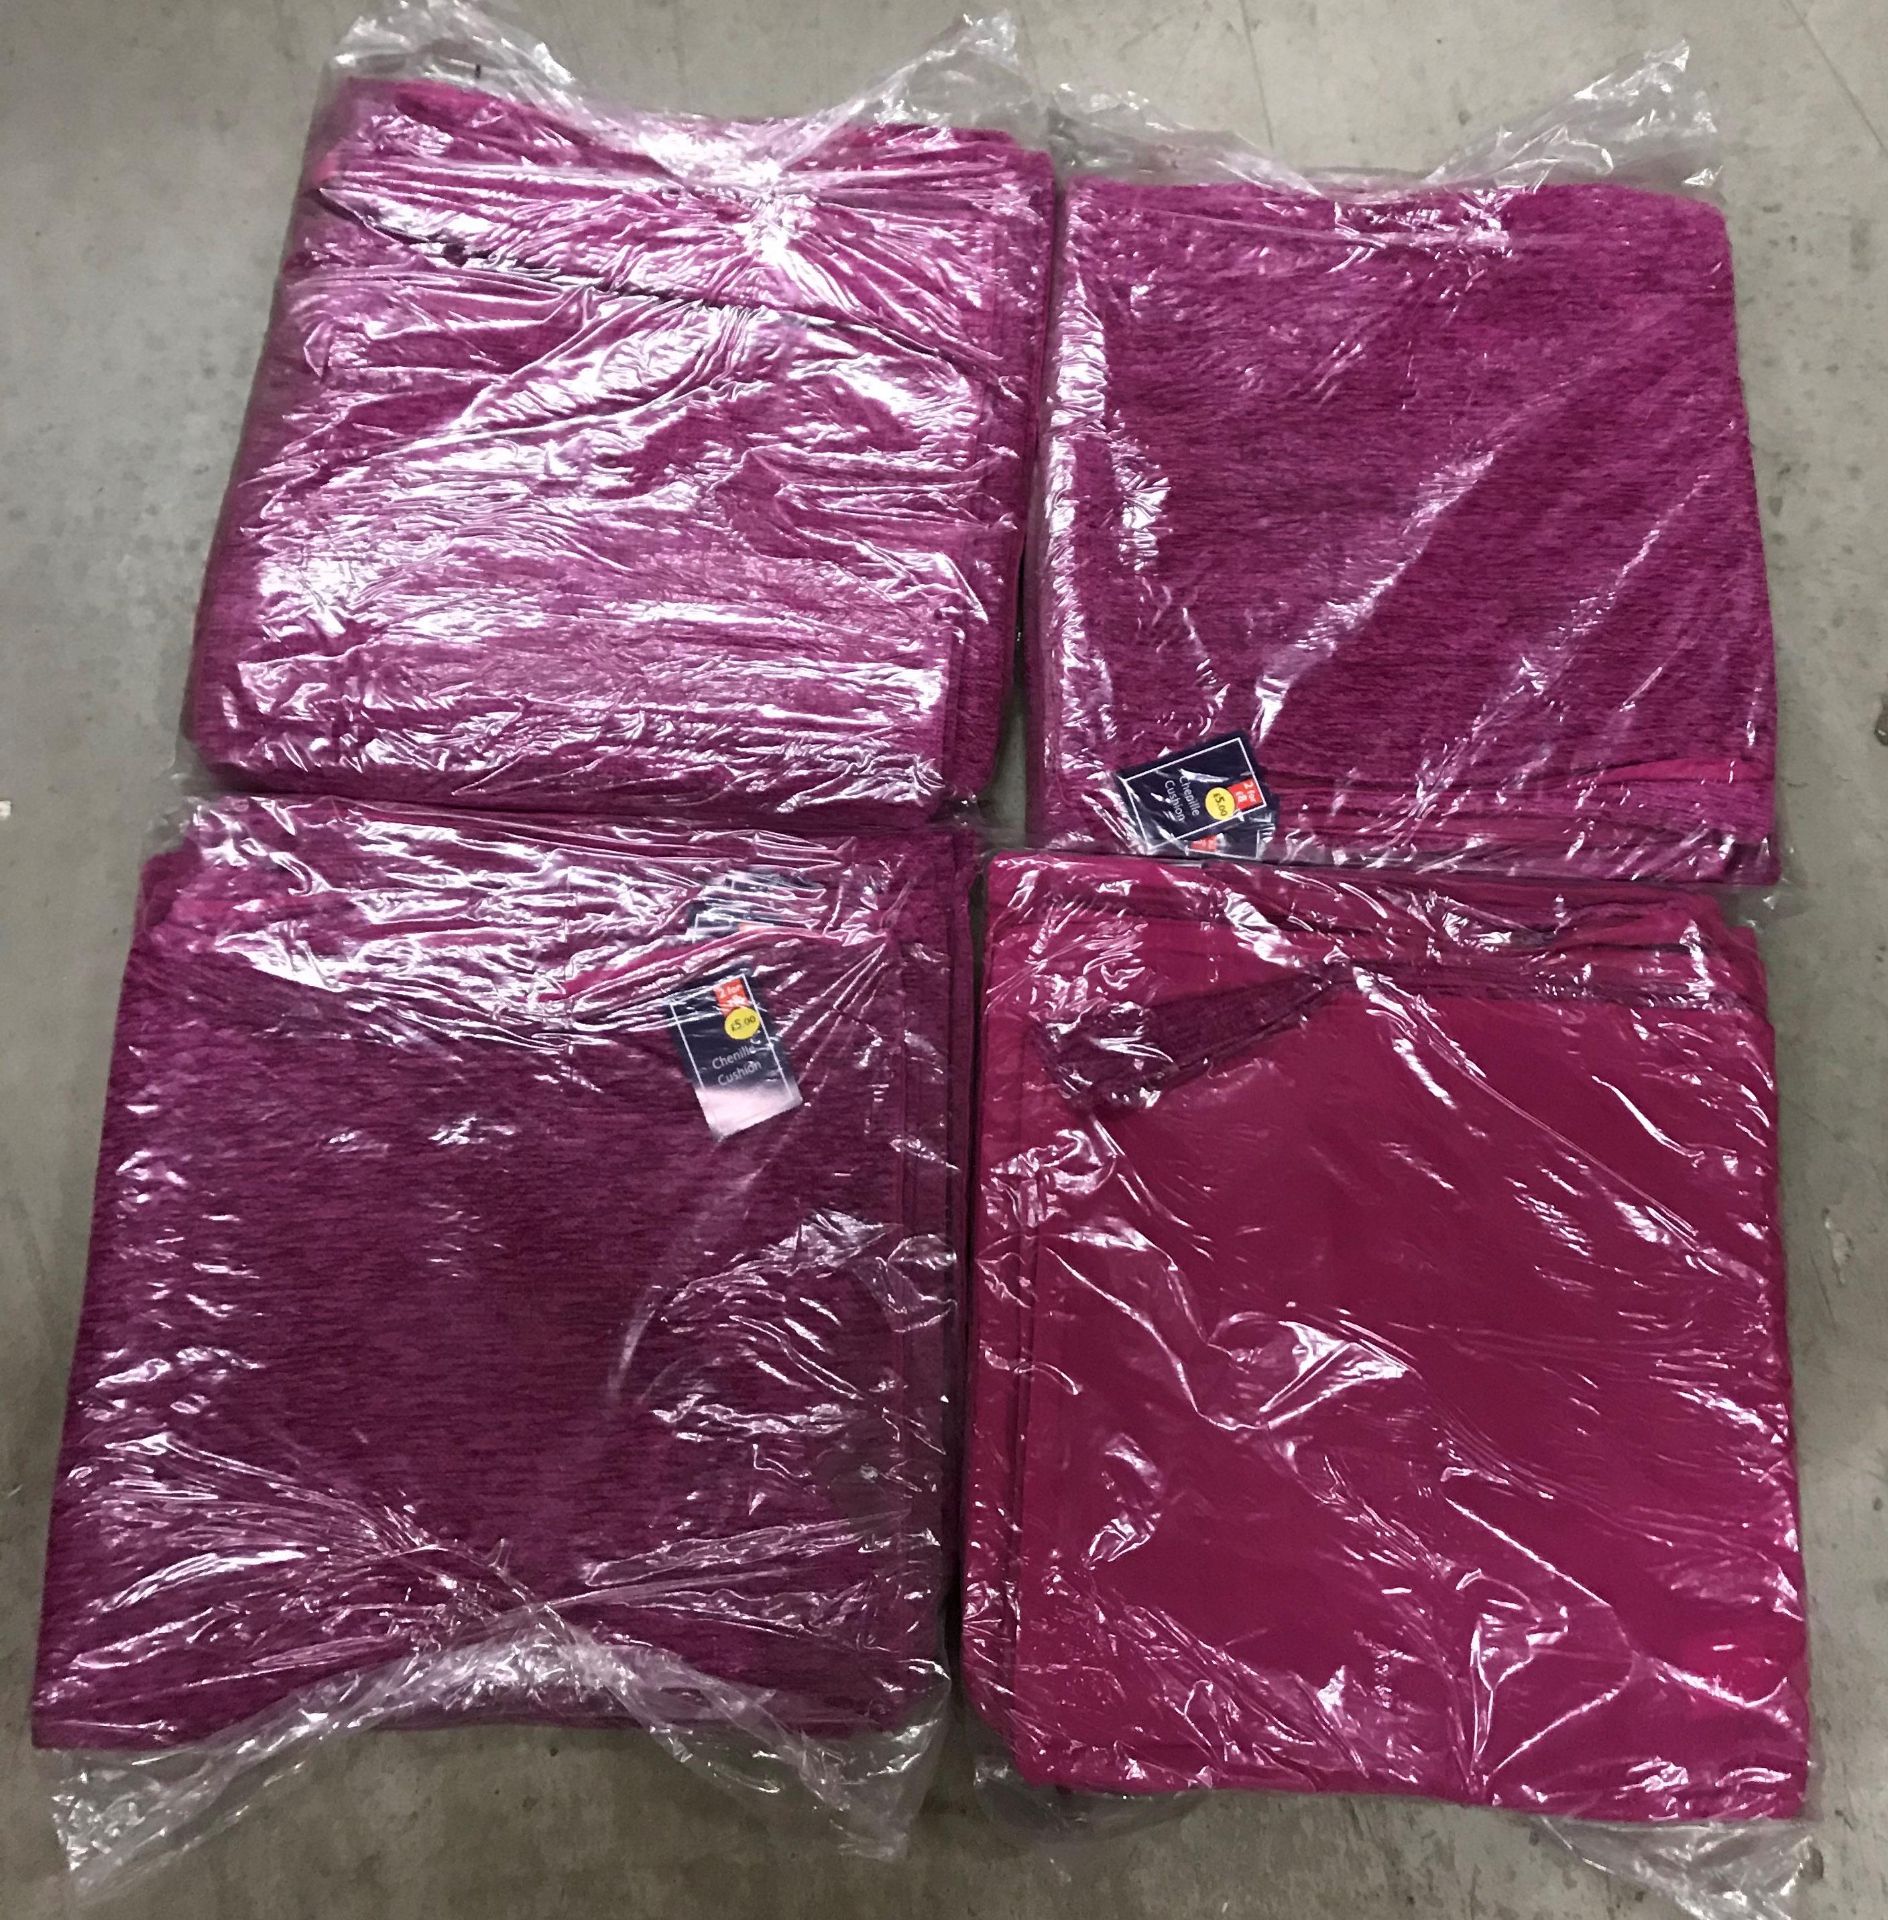 2 x packs of 8 chenille cushion covers in plum - 40 x 40cm - Image 2 of 3